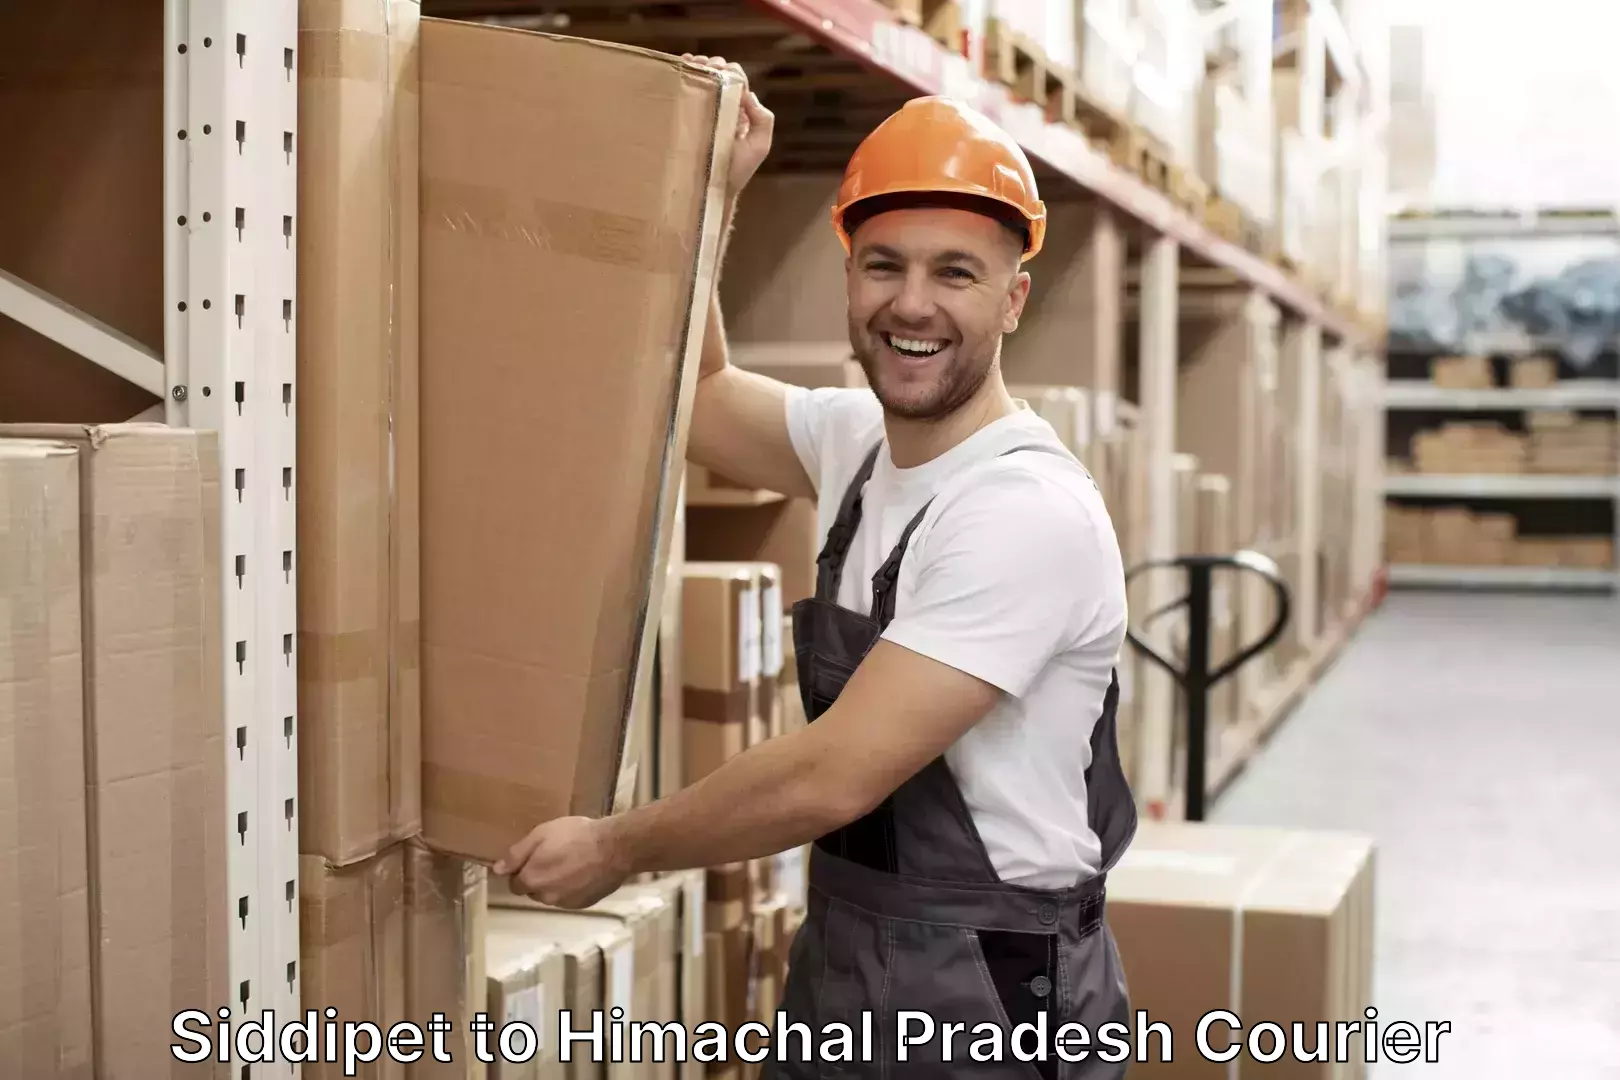 Baggage delivery technology Siddipet to Himachal Pradesh